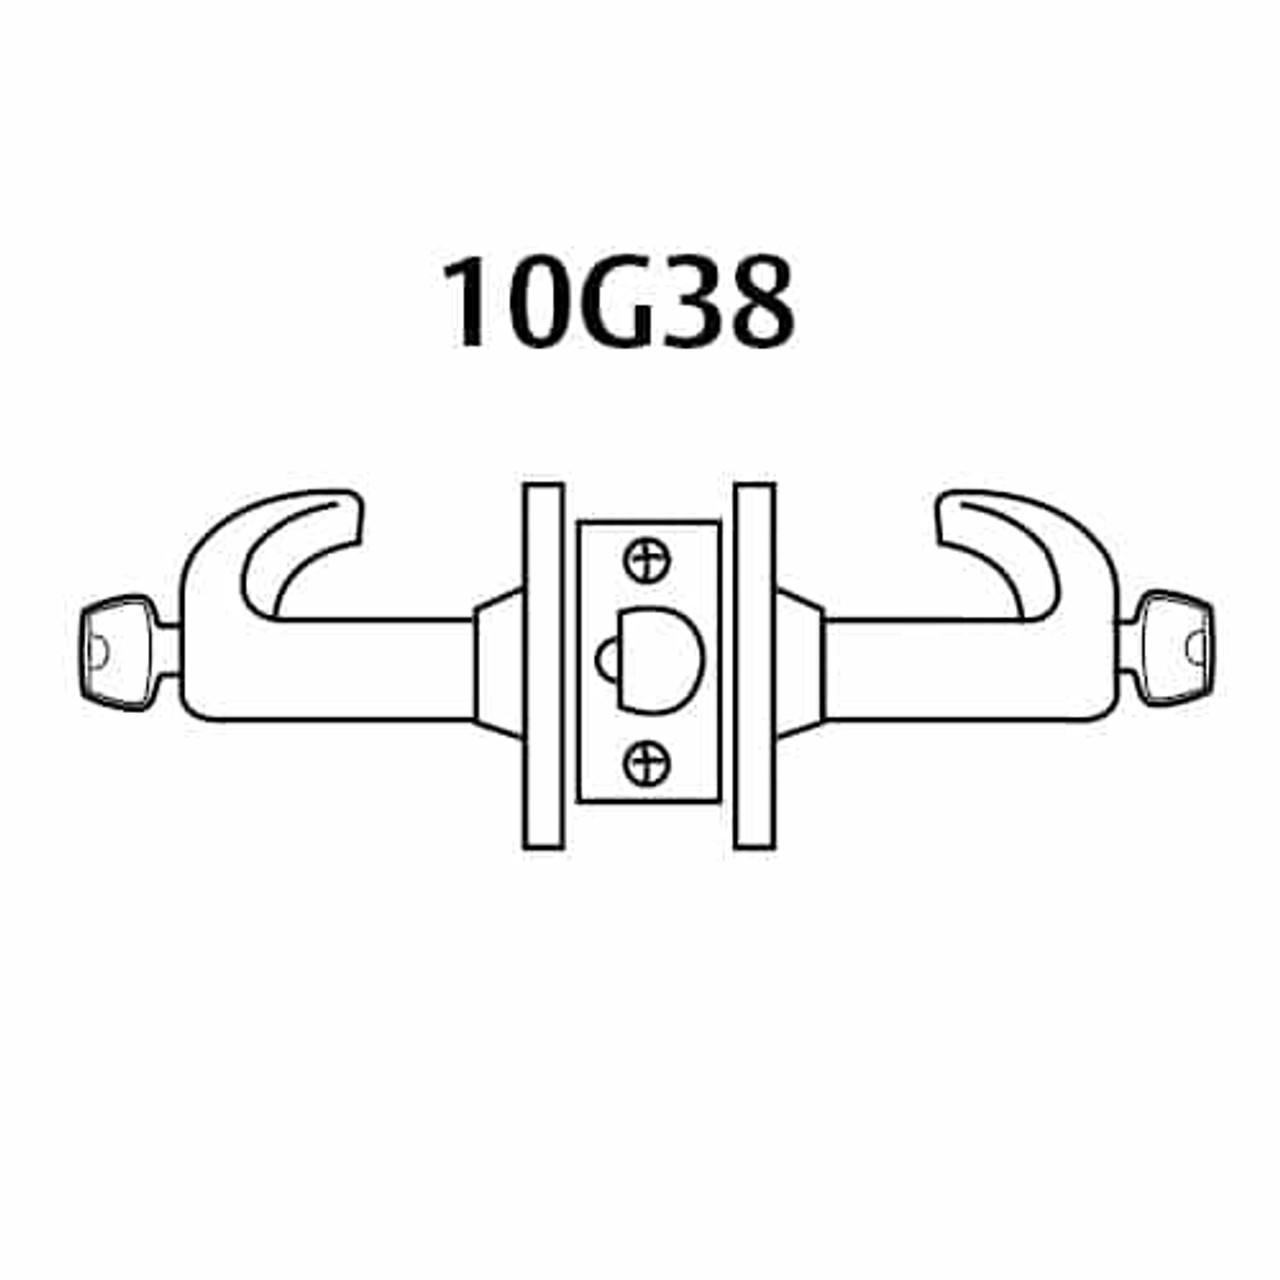 2860-10G38-LB-26 Sargent 10 Line Cylindrical Classroom Locks with B Lever Design and L Rose Prepped for LFIC in Bright Chrome